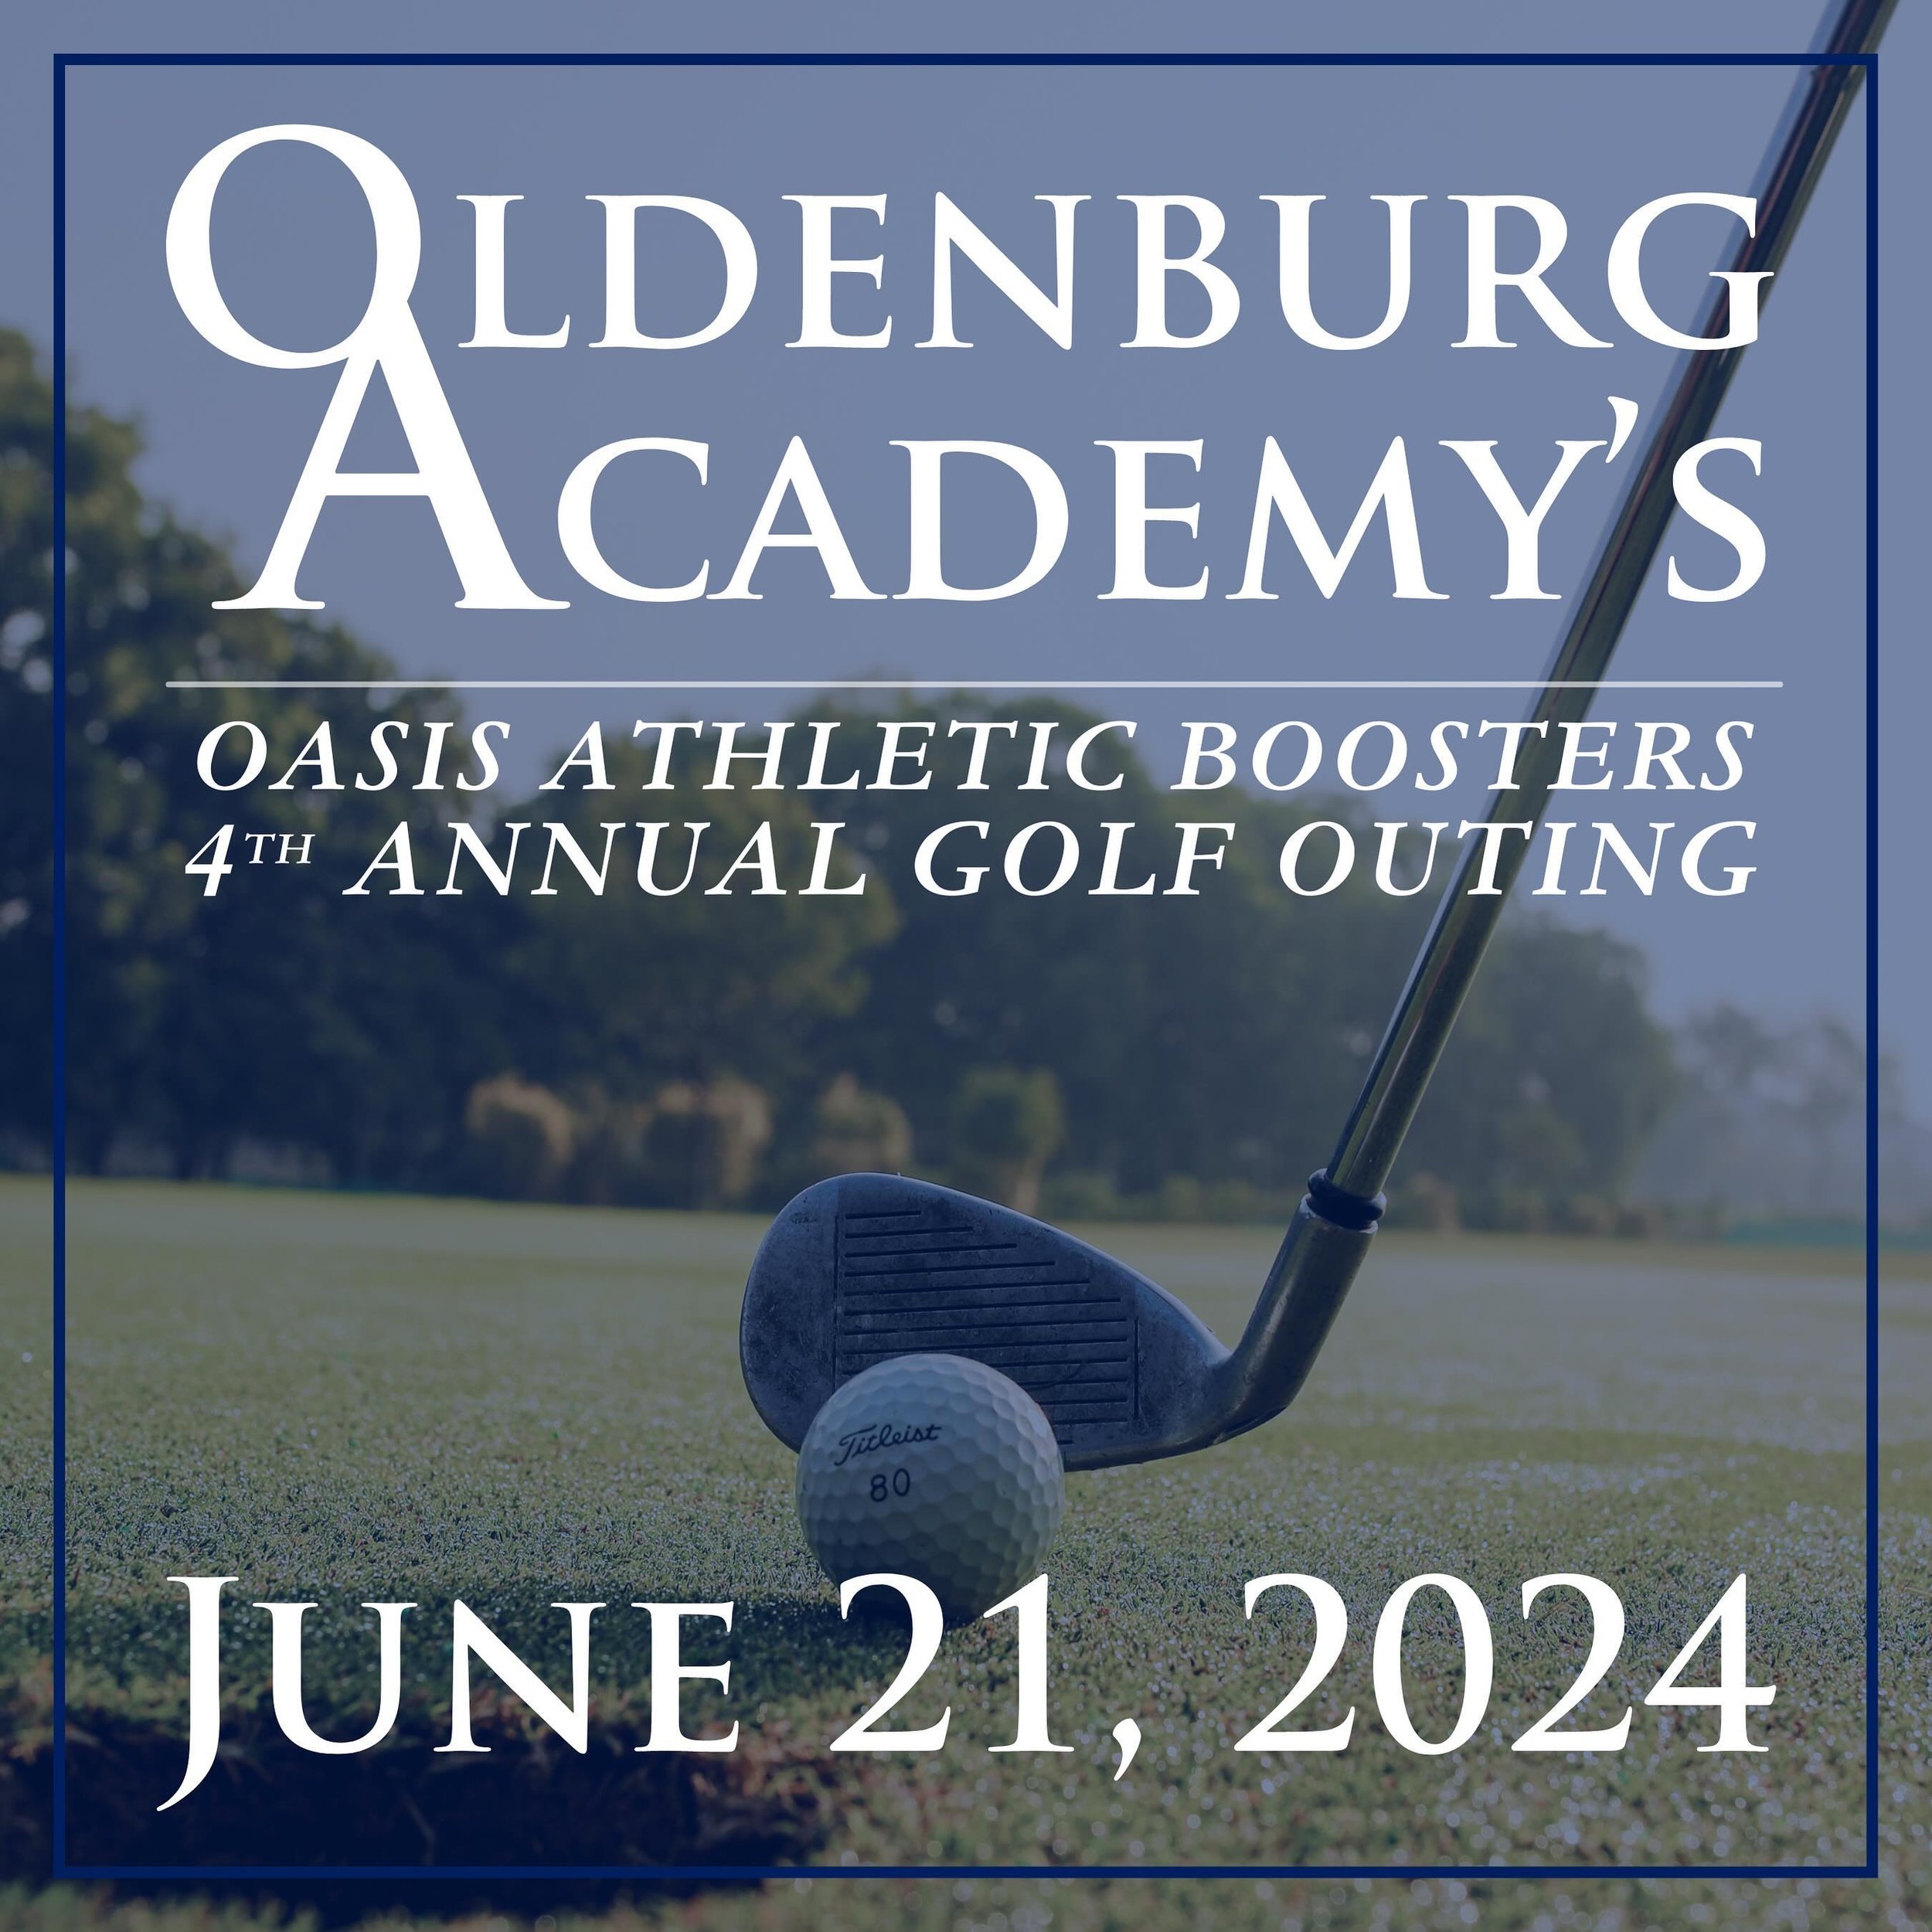 OA&rsquo;s 4th Annual OASIS Athletic Boosters Golf Outing will be held on June 21, 2024!

Hillcrest Country Club
Tee Time | 1:00 PM

Stay tuned for more details and registration information!